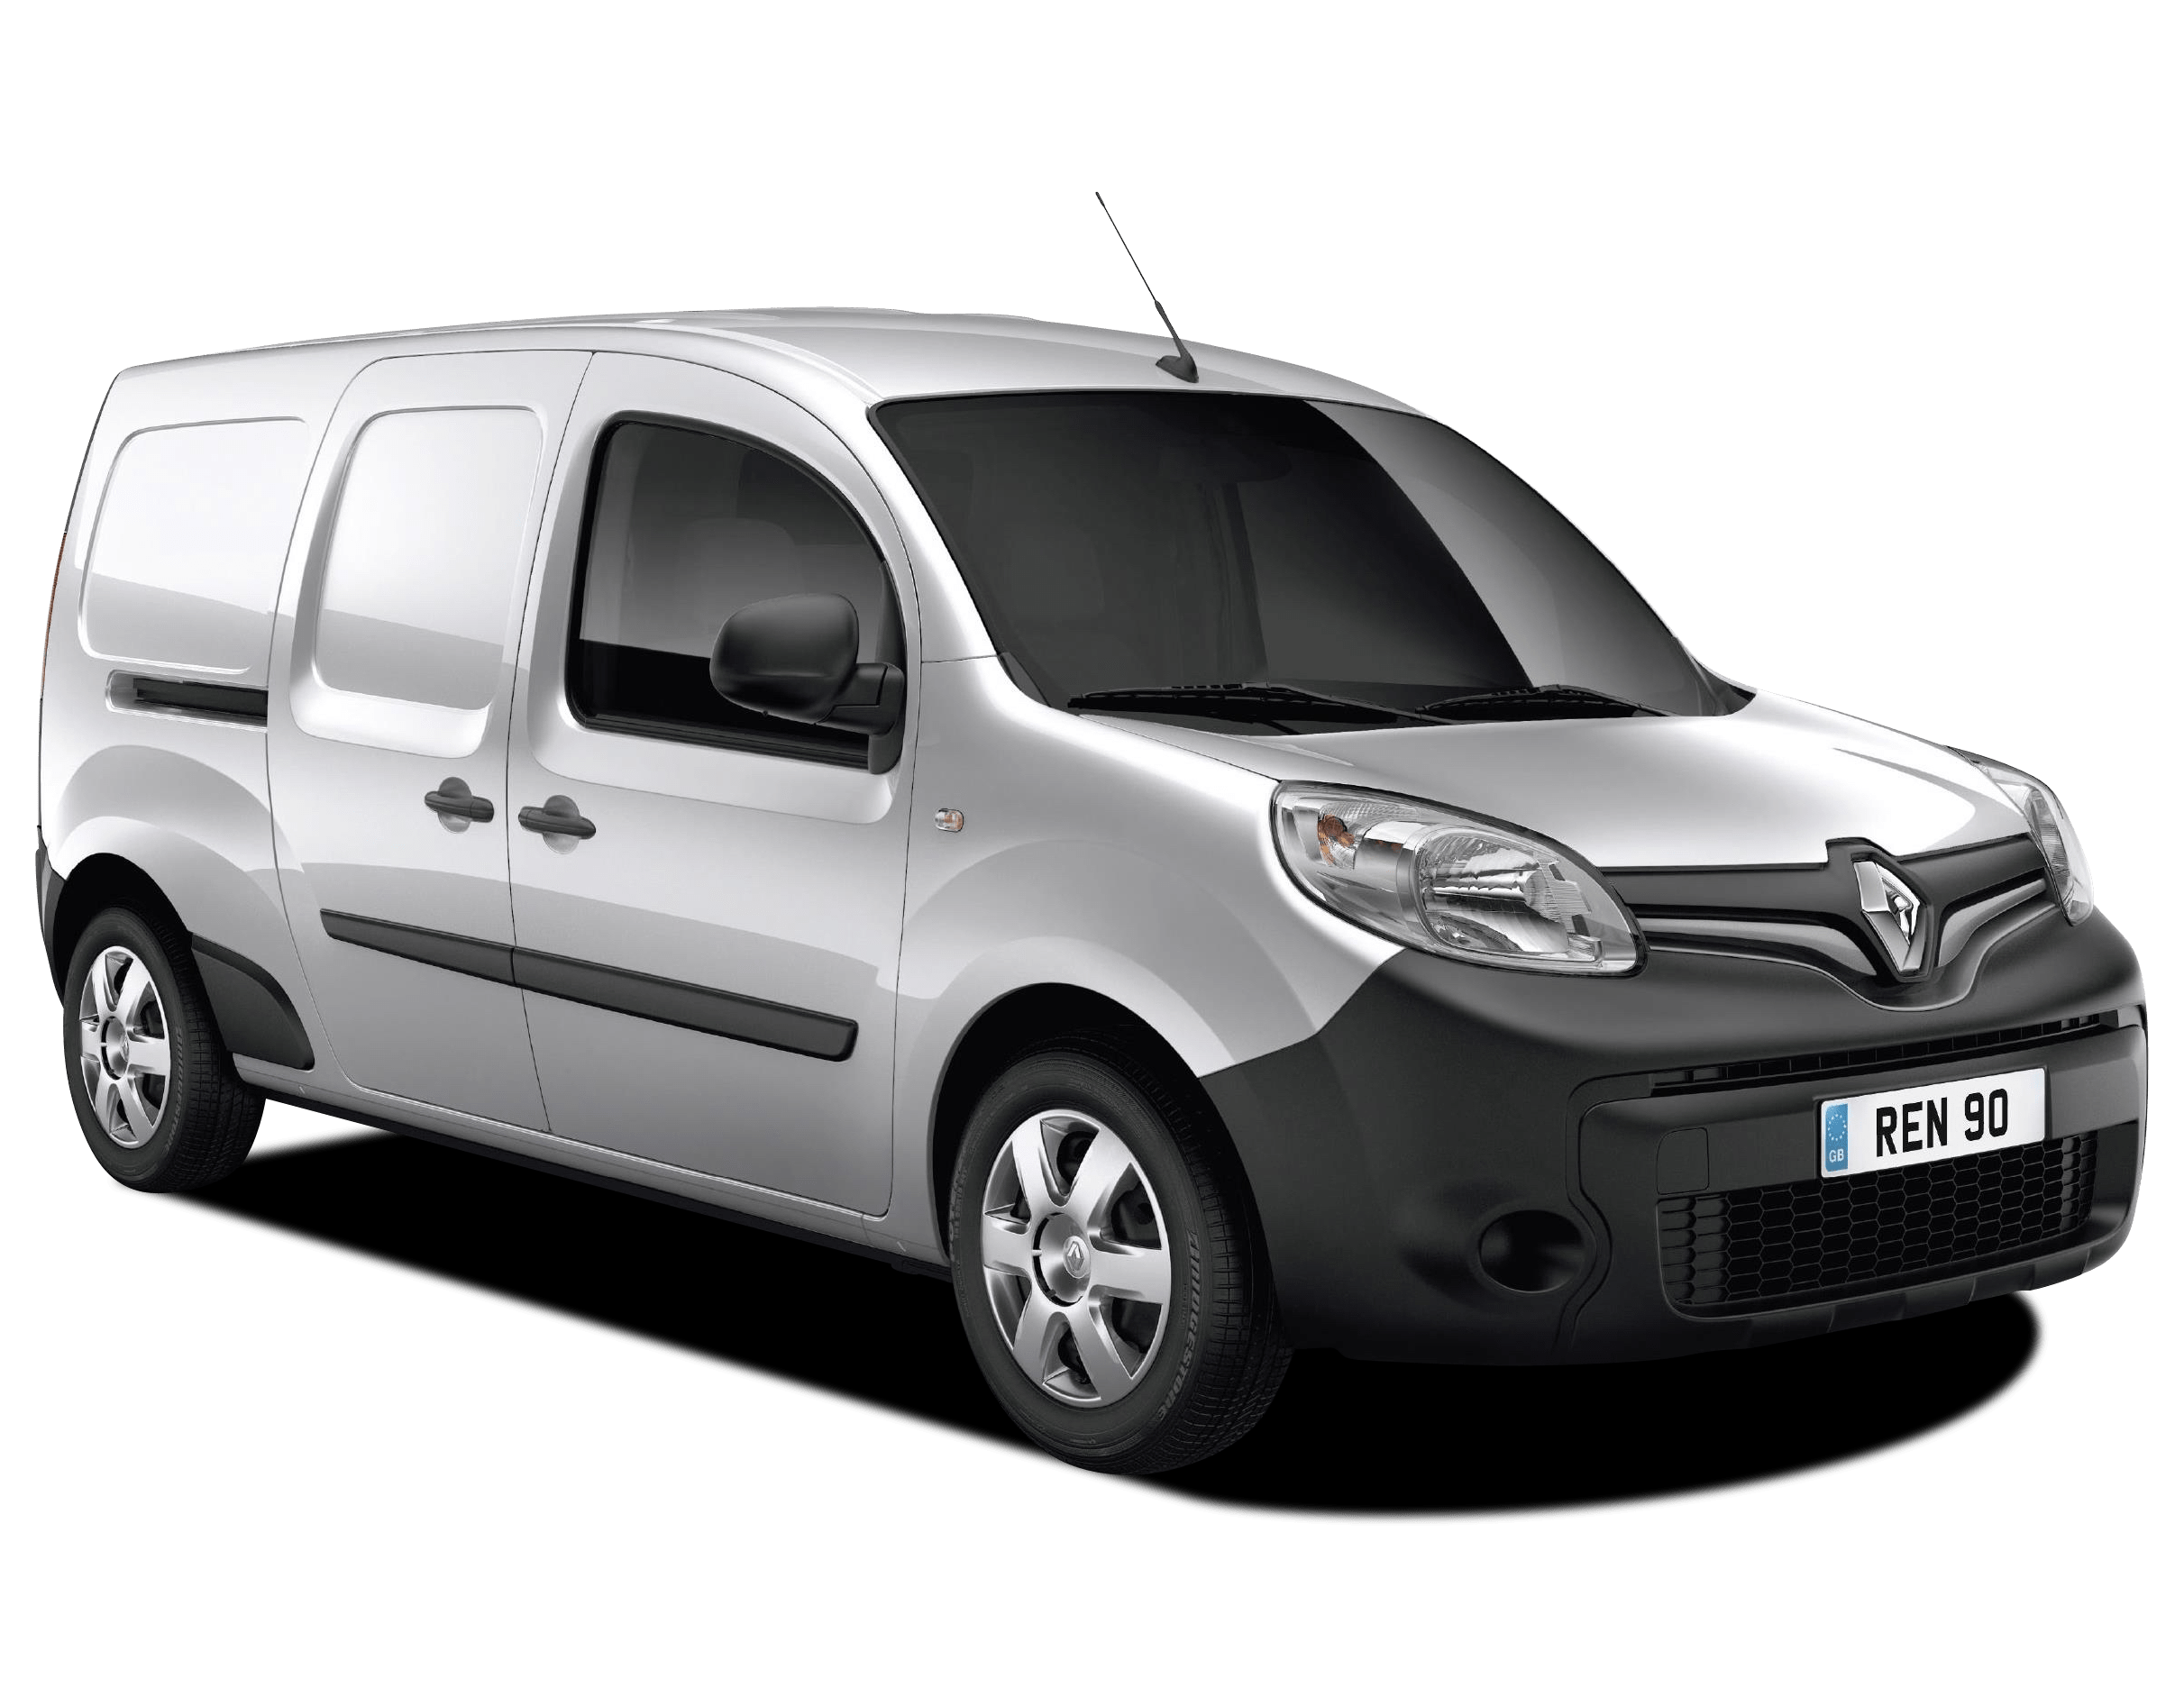 Renault Kangoo Review, For Sale, Colours, Interior, Models & Specs